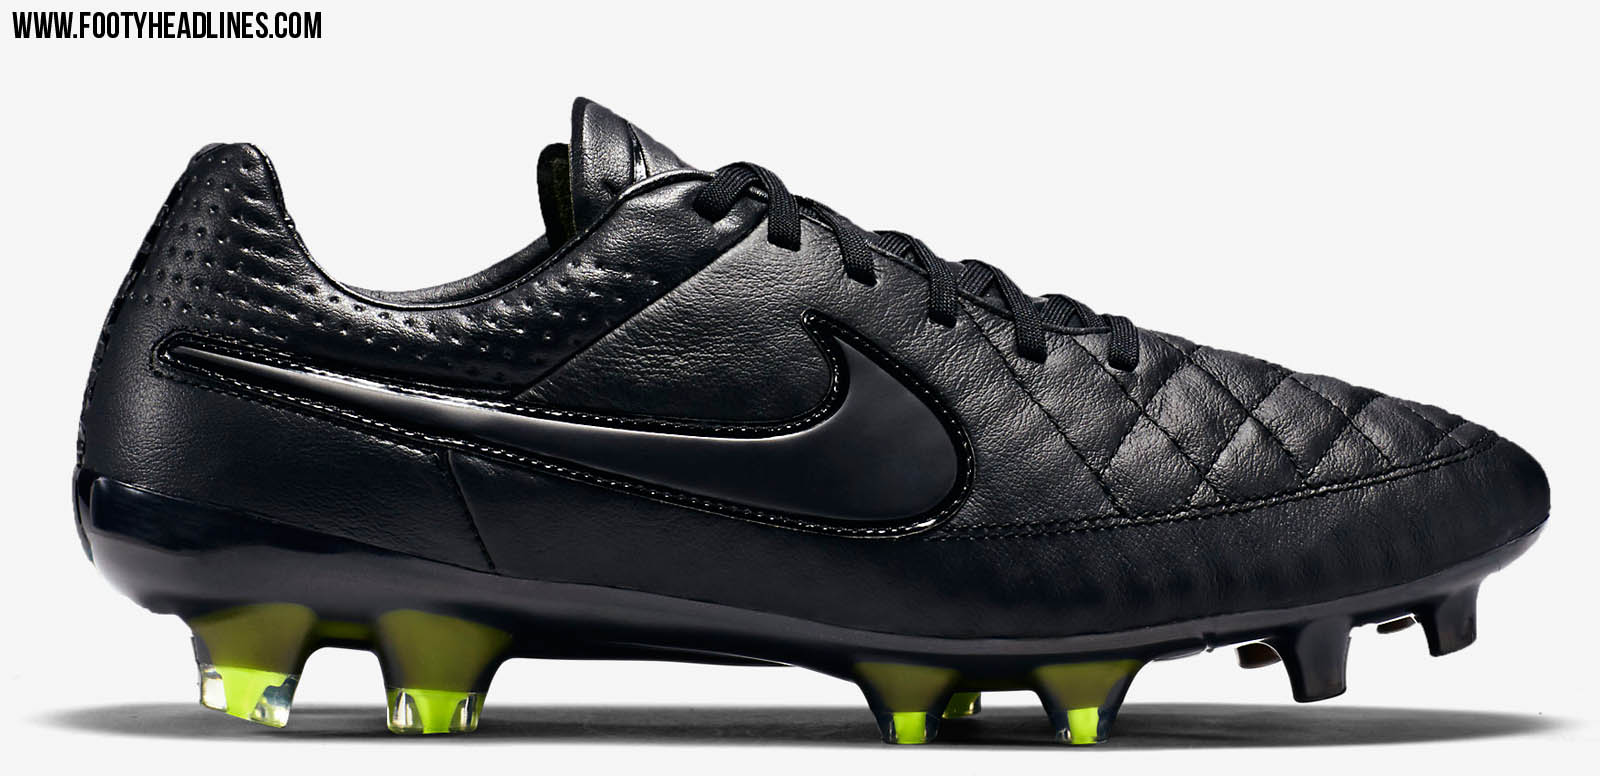 Blackout Reflective Nike Tiempo 2015 Boots Released - Footy Headlines